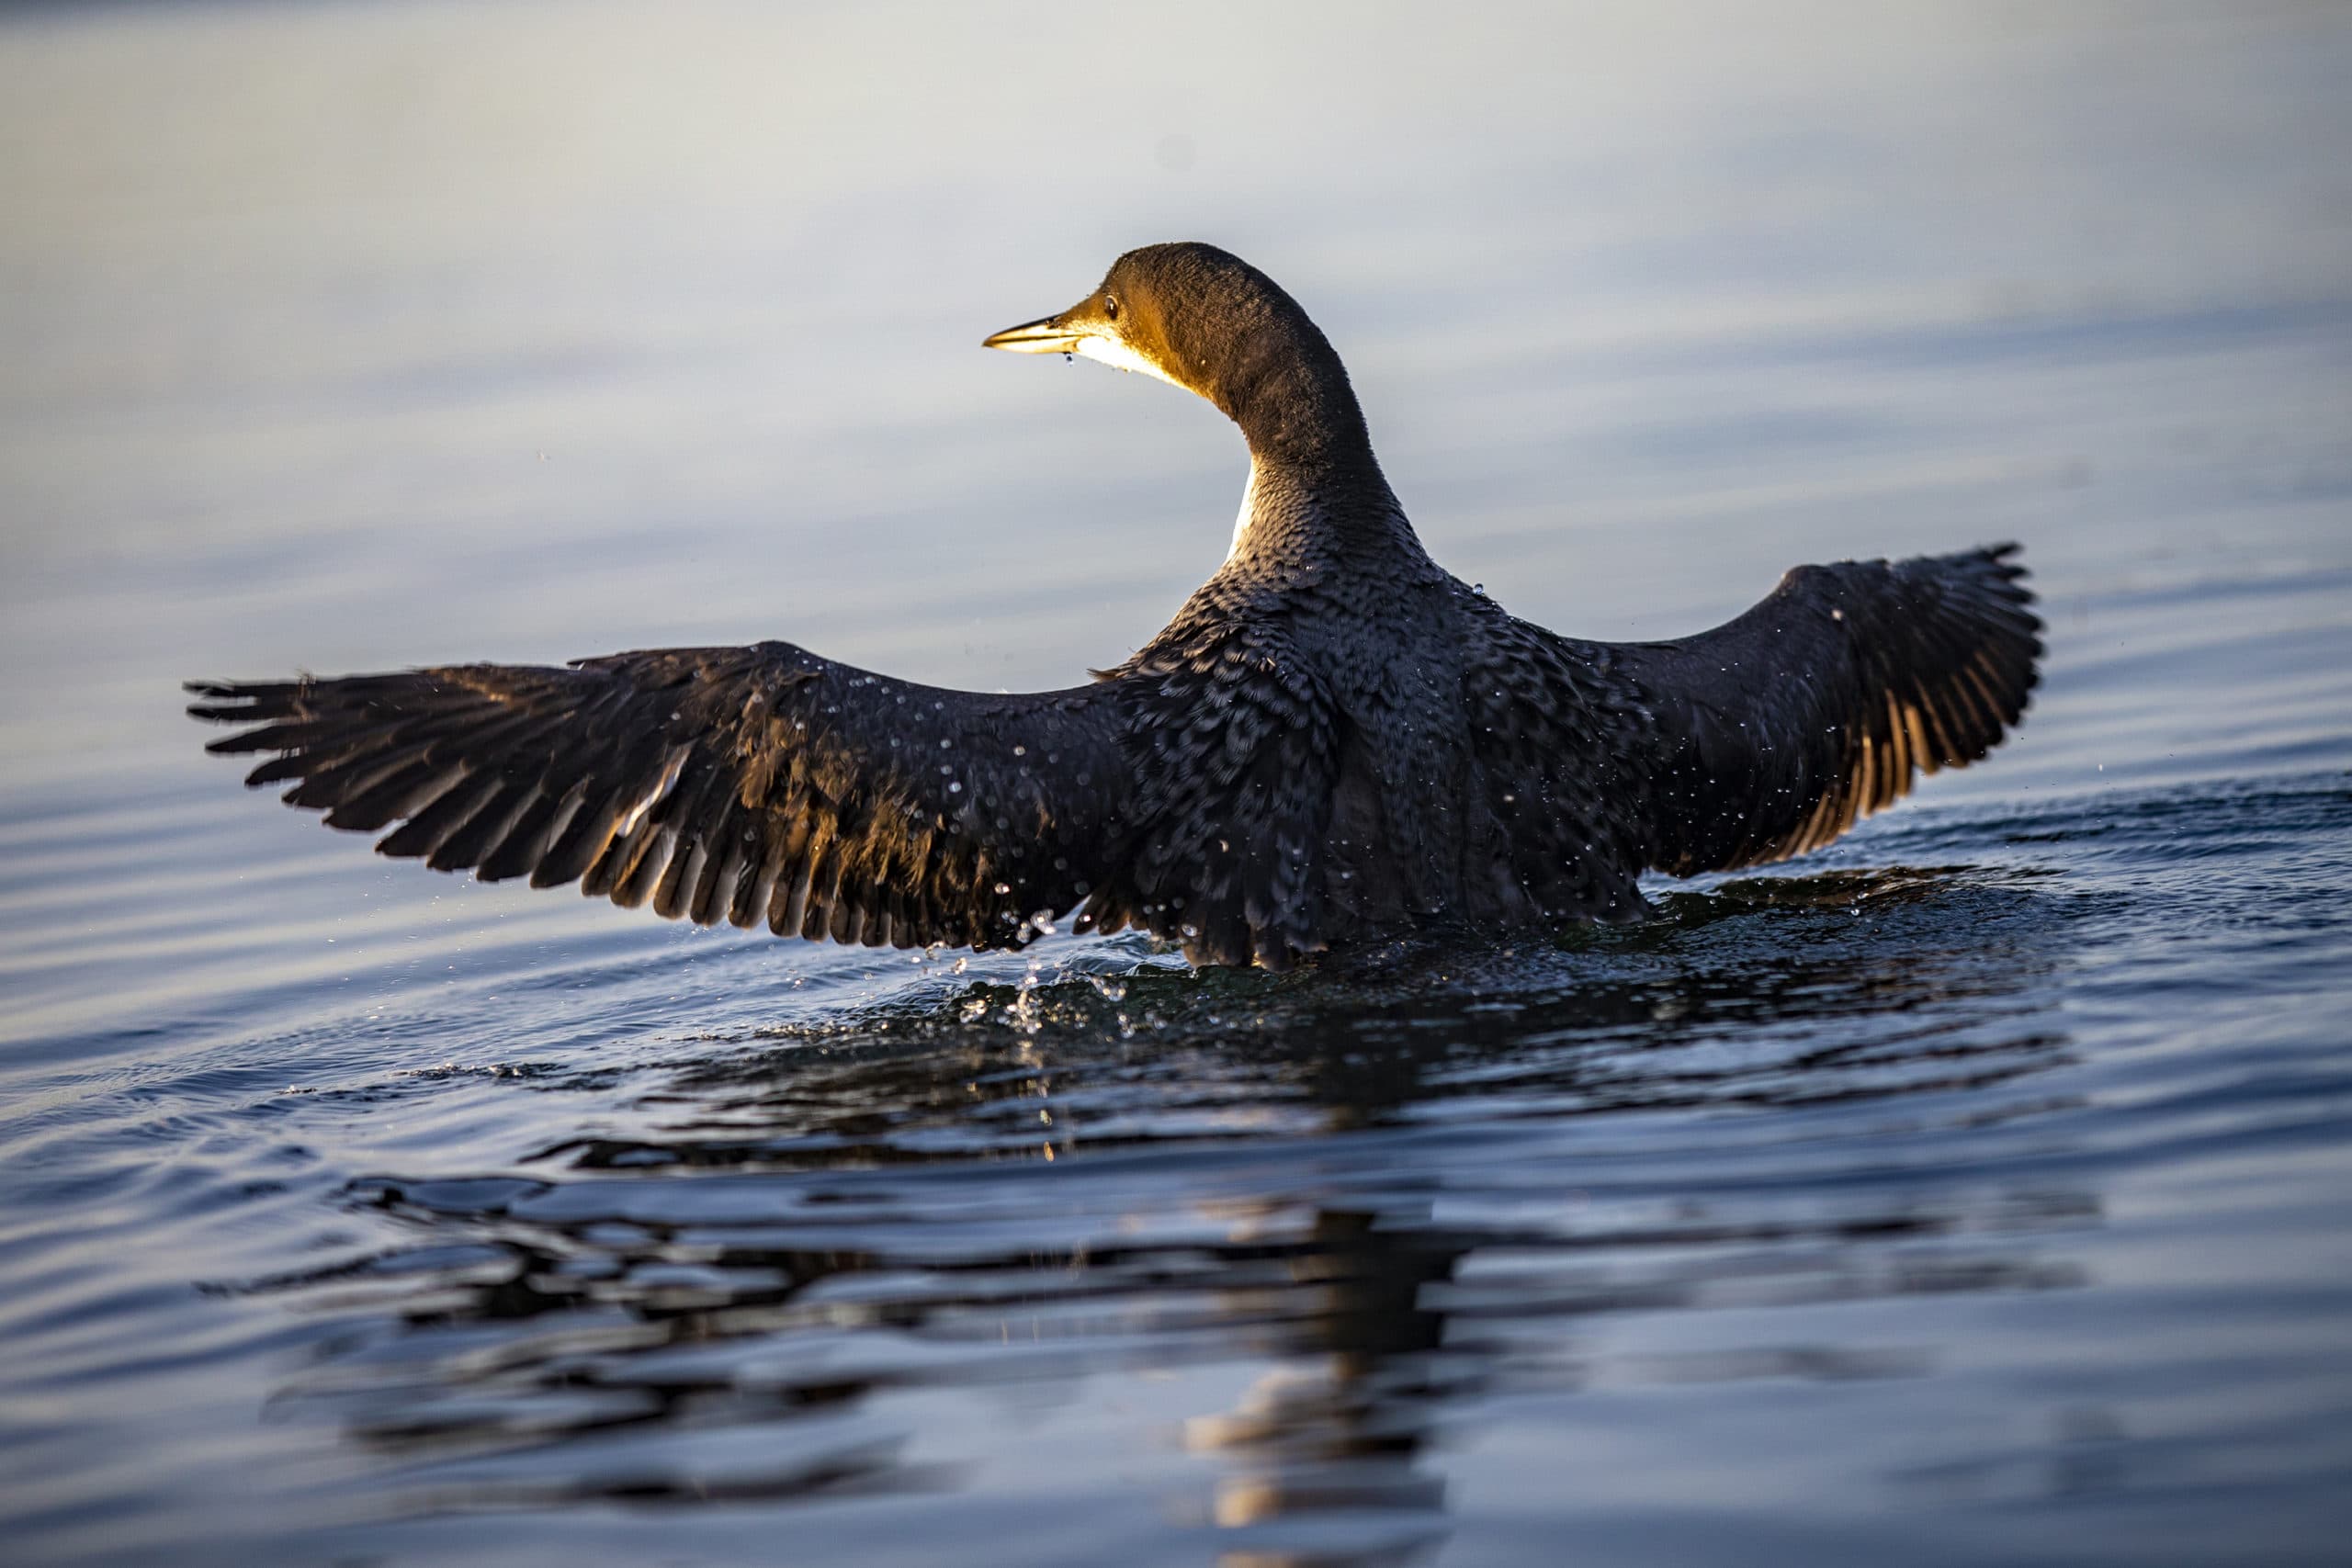 The loon chick transported from Messalonskee Lake, near Belgrade, Maine, adapts to the water of it's new home in Watuppa Pond in Fall River, Massachusetts. (Jesse Costa/WBUR)